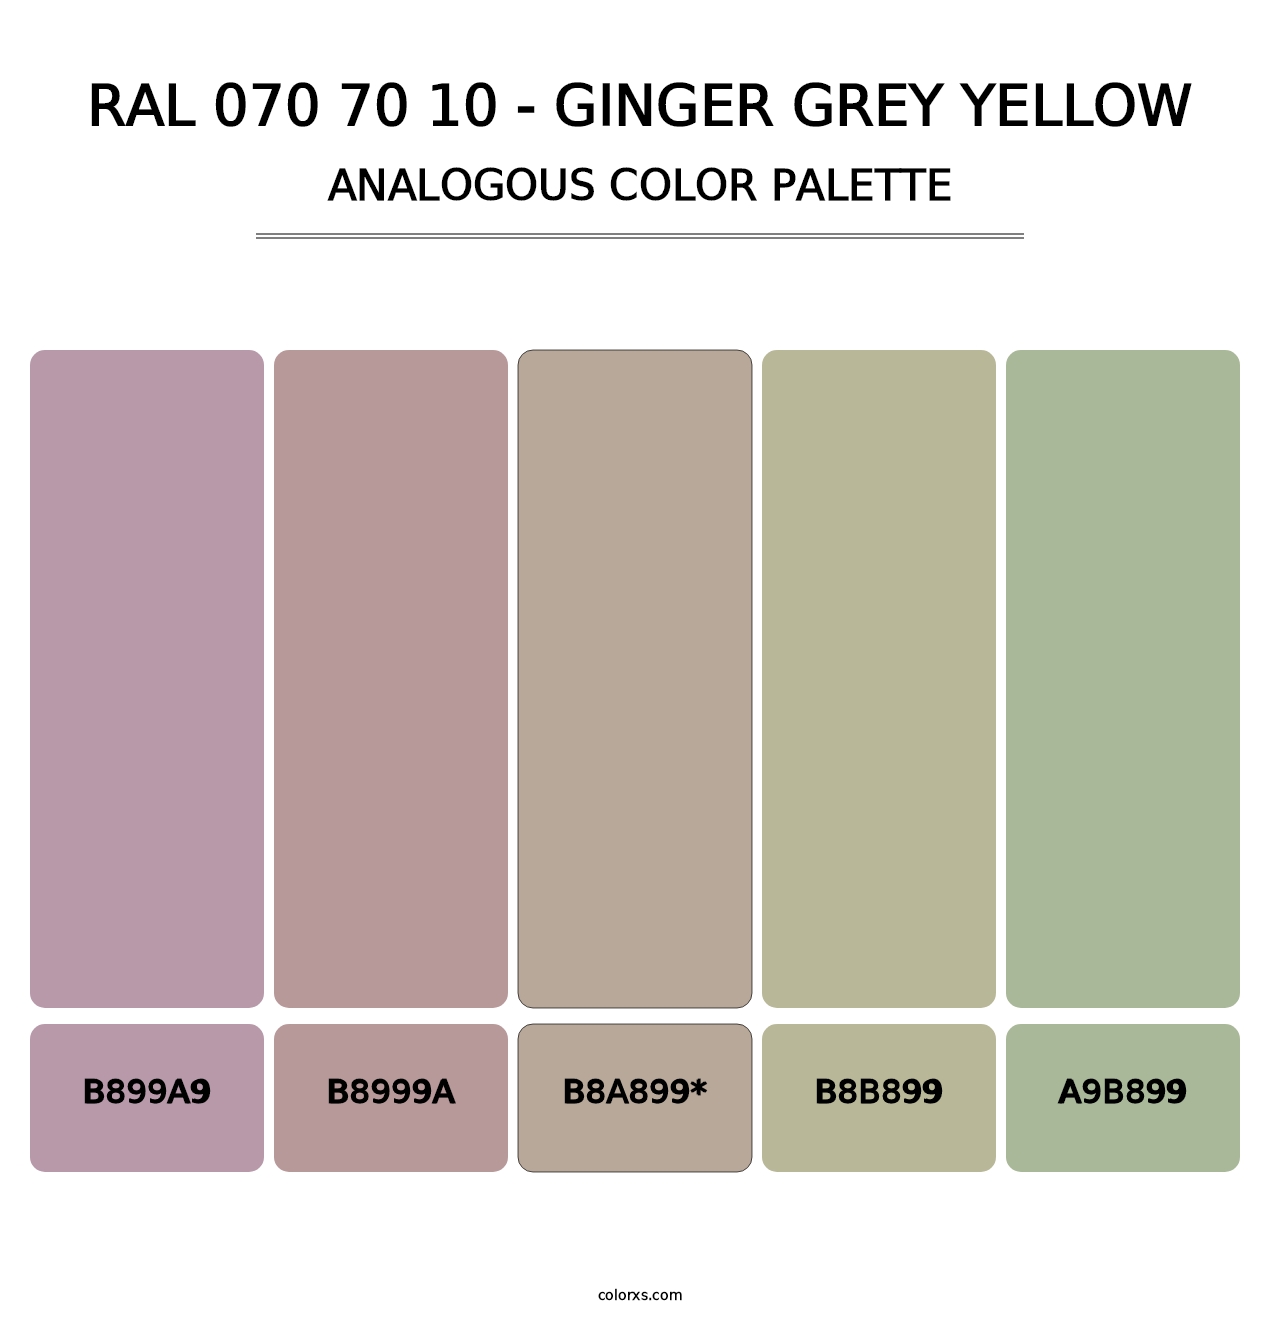 RAL 070 70 10 - Ginger Grey Yellow - Analogous Color Palette